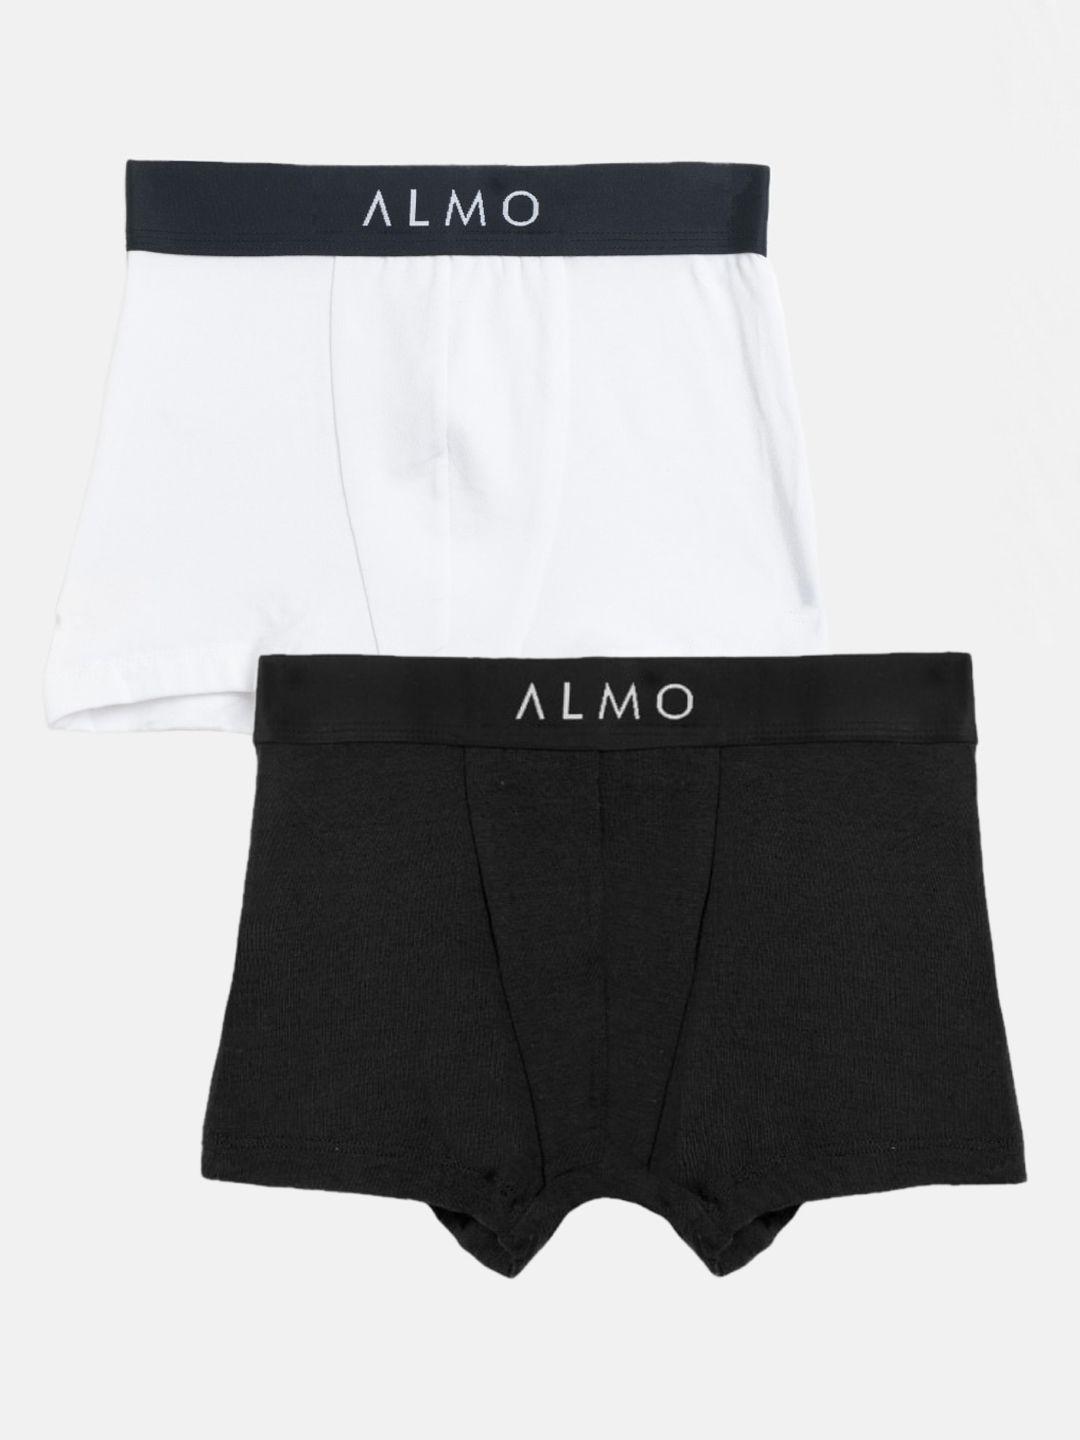 almo-wear-pack-of-2-logo-printed-detail-trunks